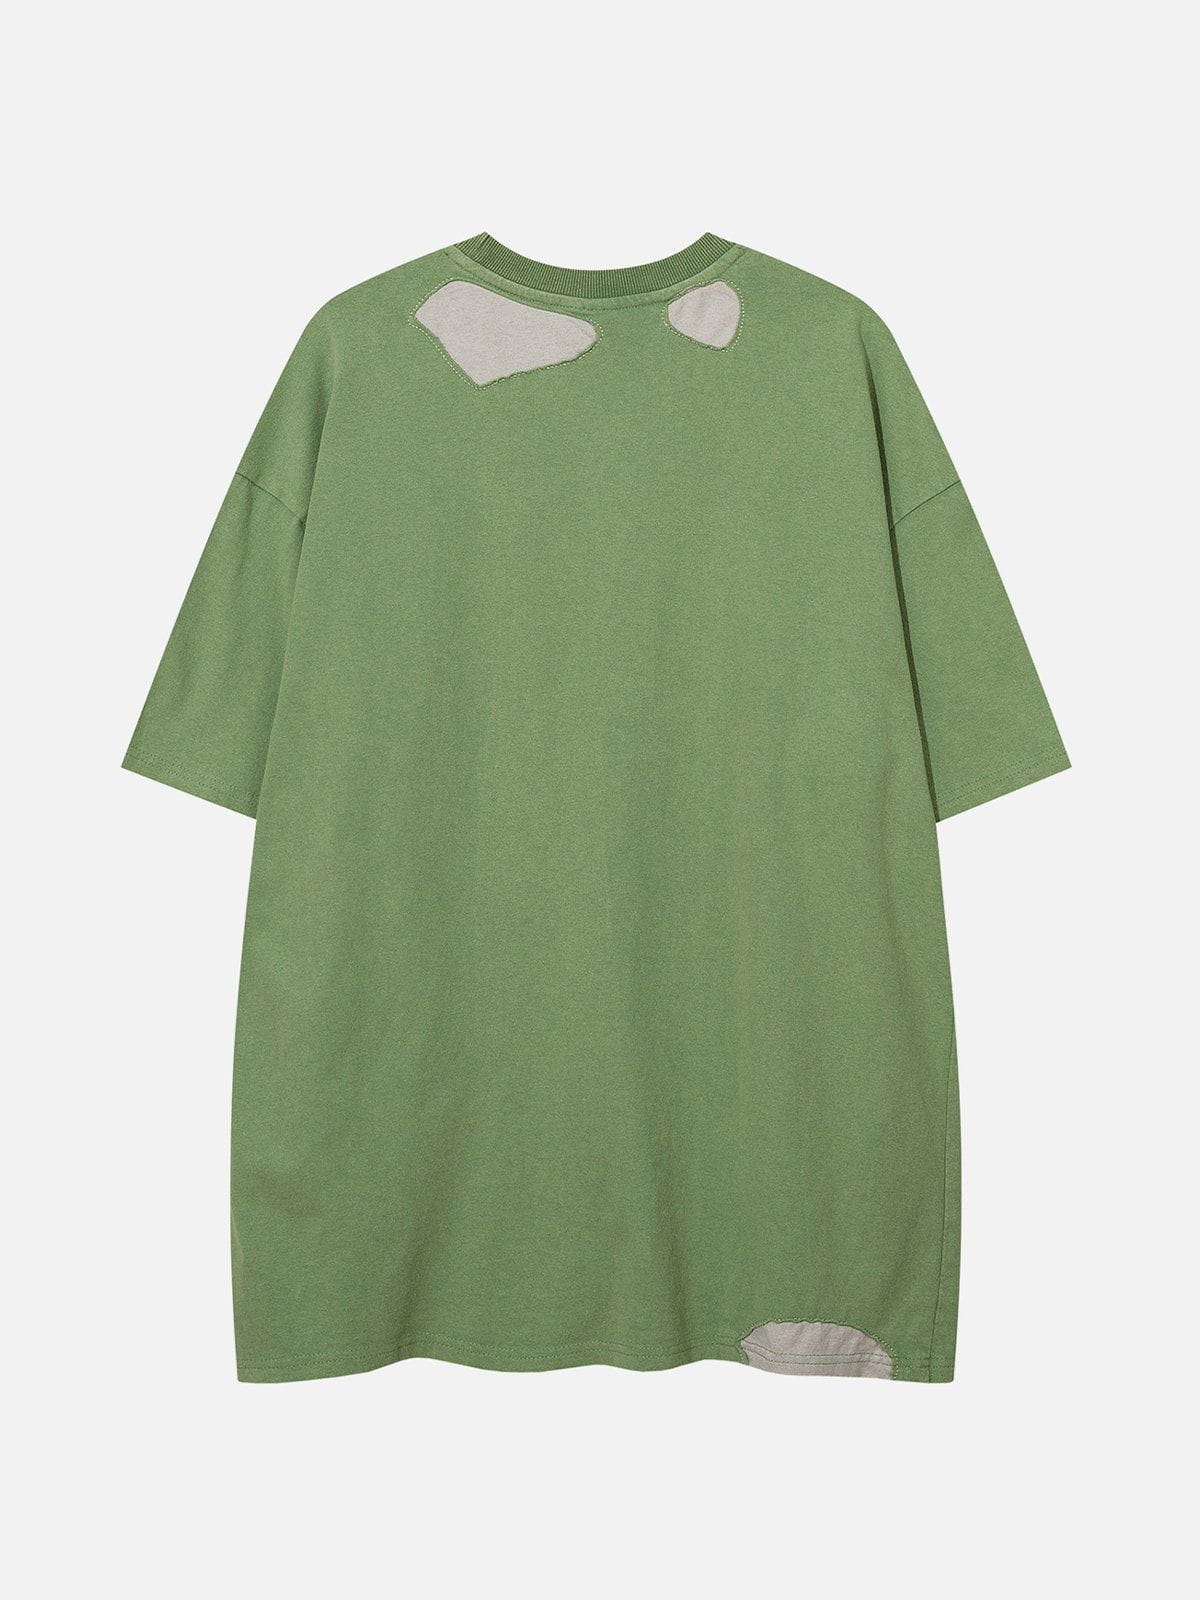 WLS Hole Patchwork Washed Tee